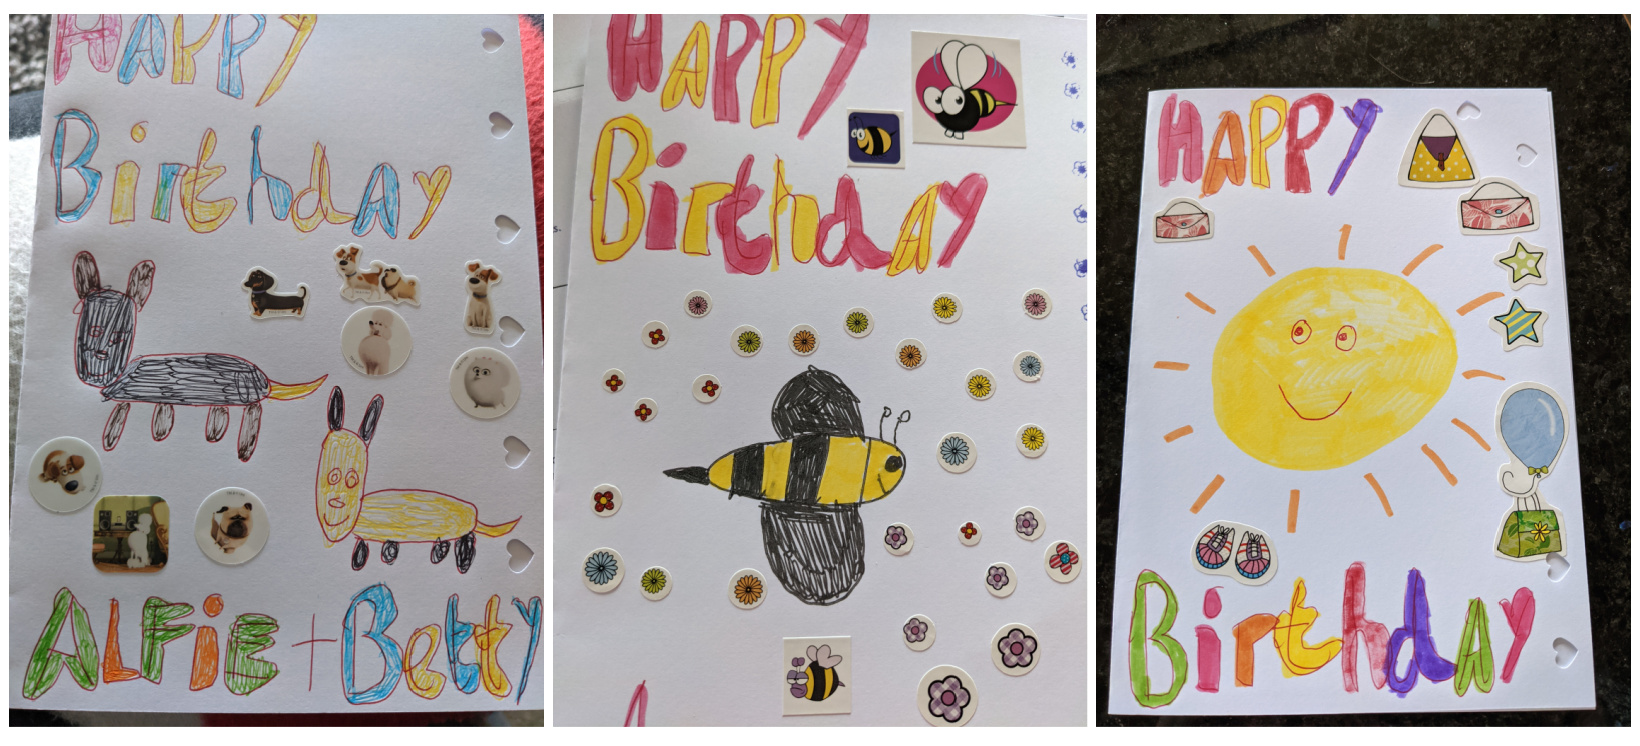 A collage of three different hand made card designs. One has dogs on it; one has bees, and one has a smiley sun.